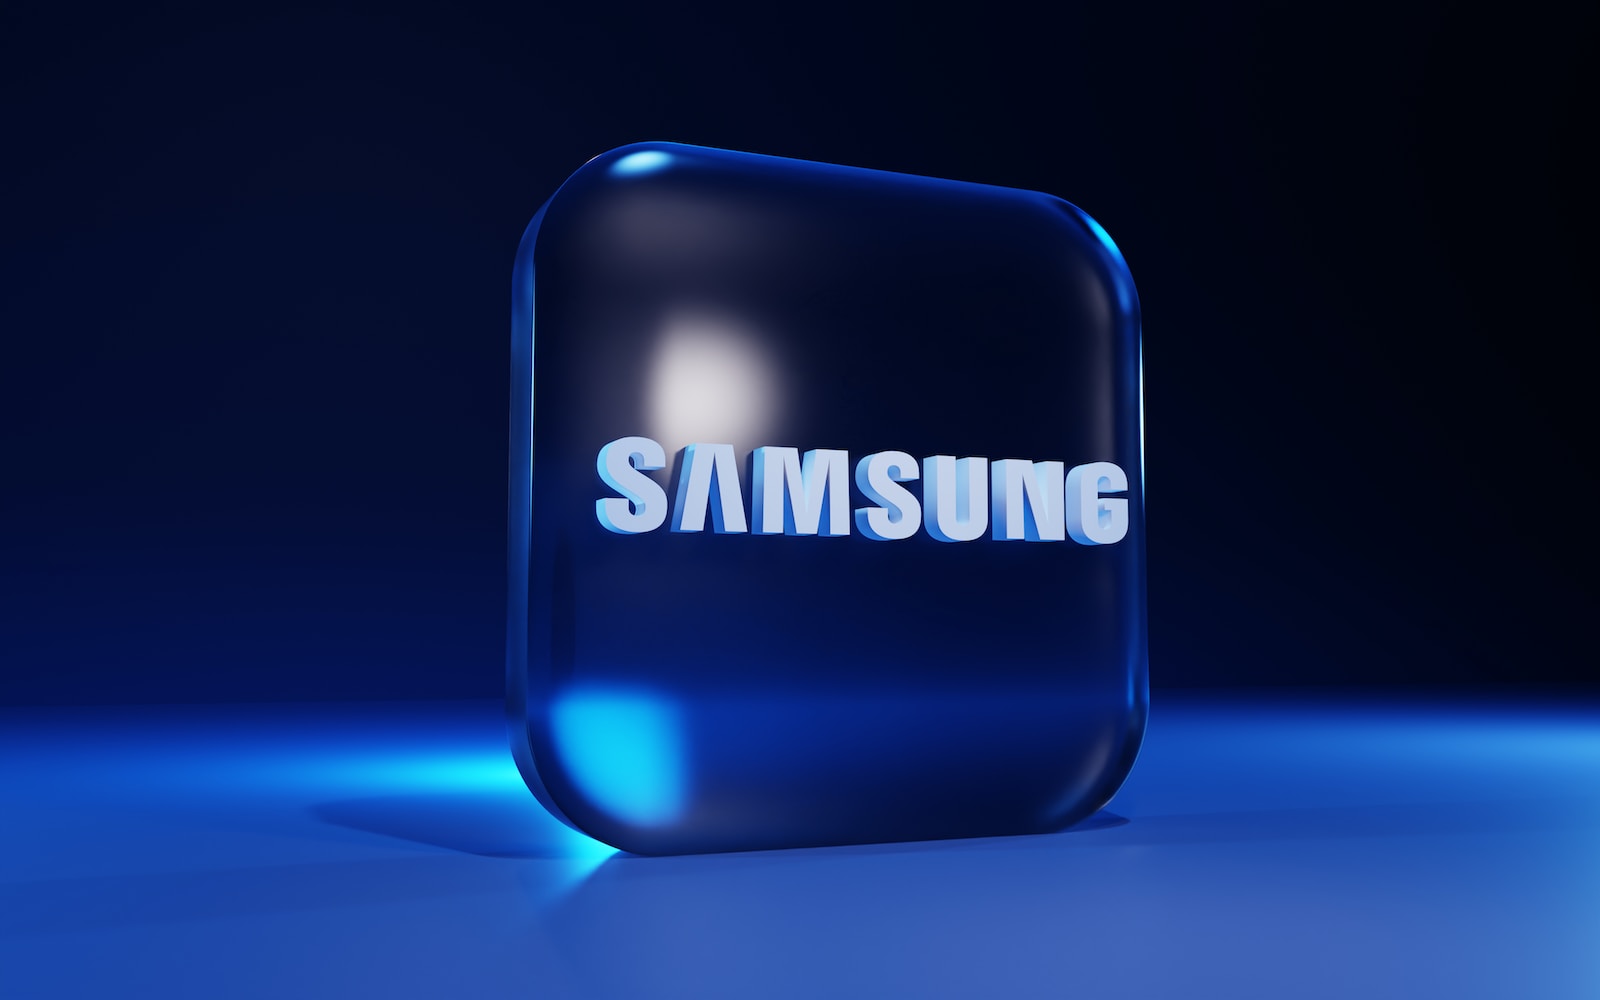 Samsung AI systems receive certification for the responsible use of technology